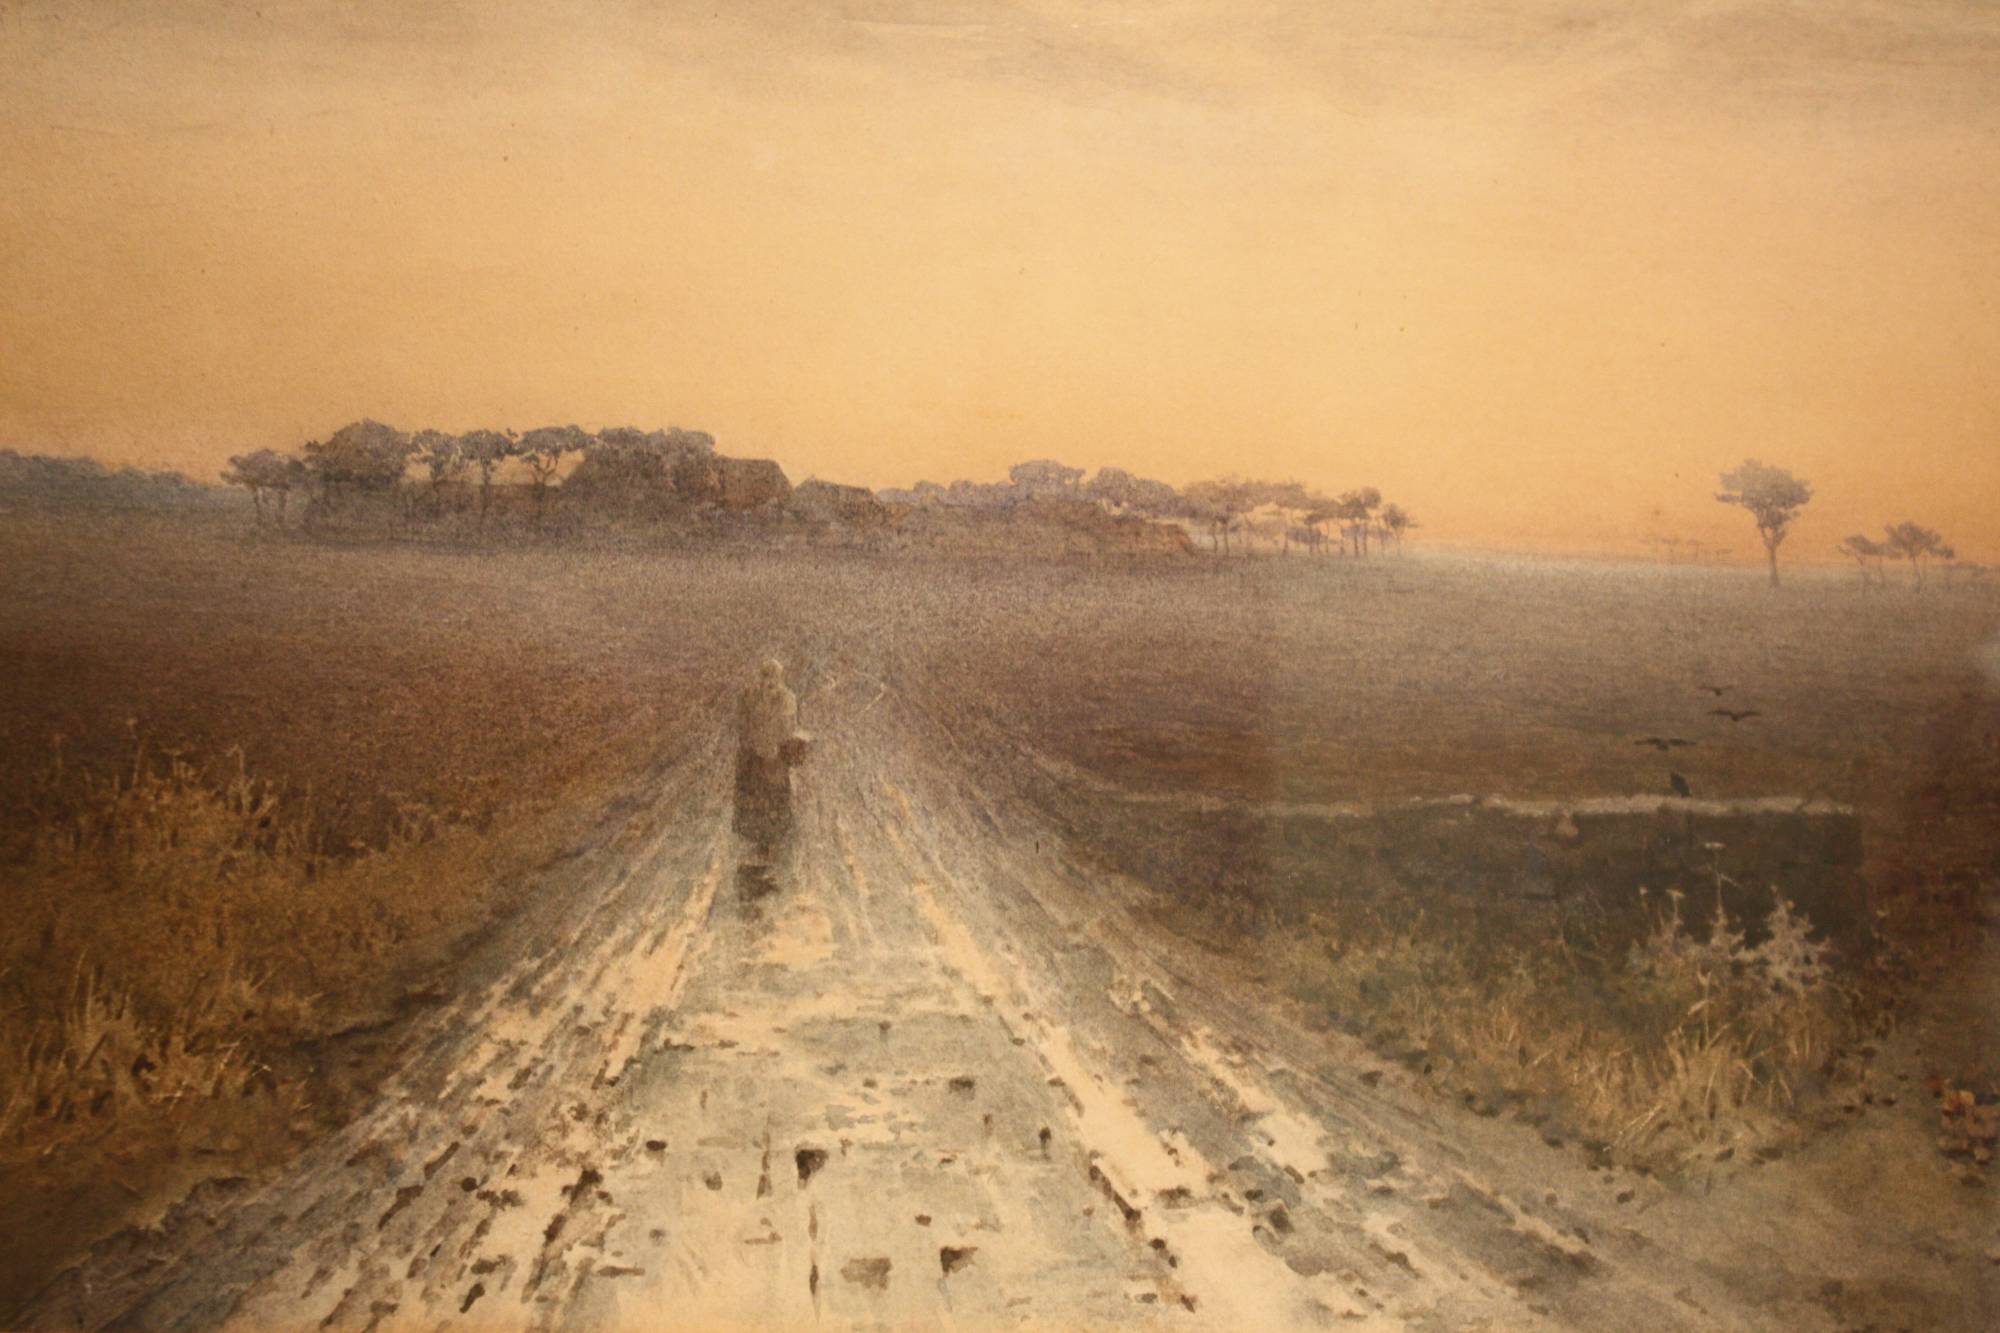 A fine 19th century watercolour rainy landscape painting by Amy Foster